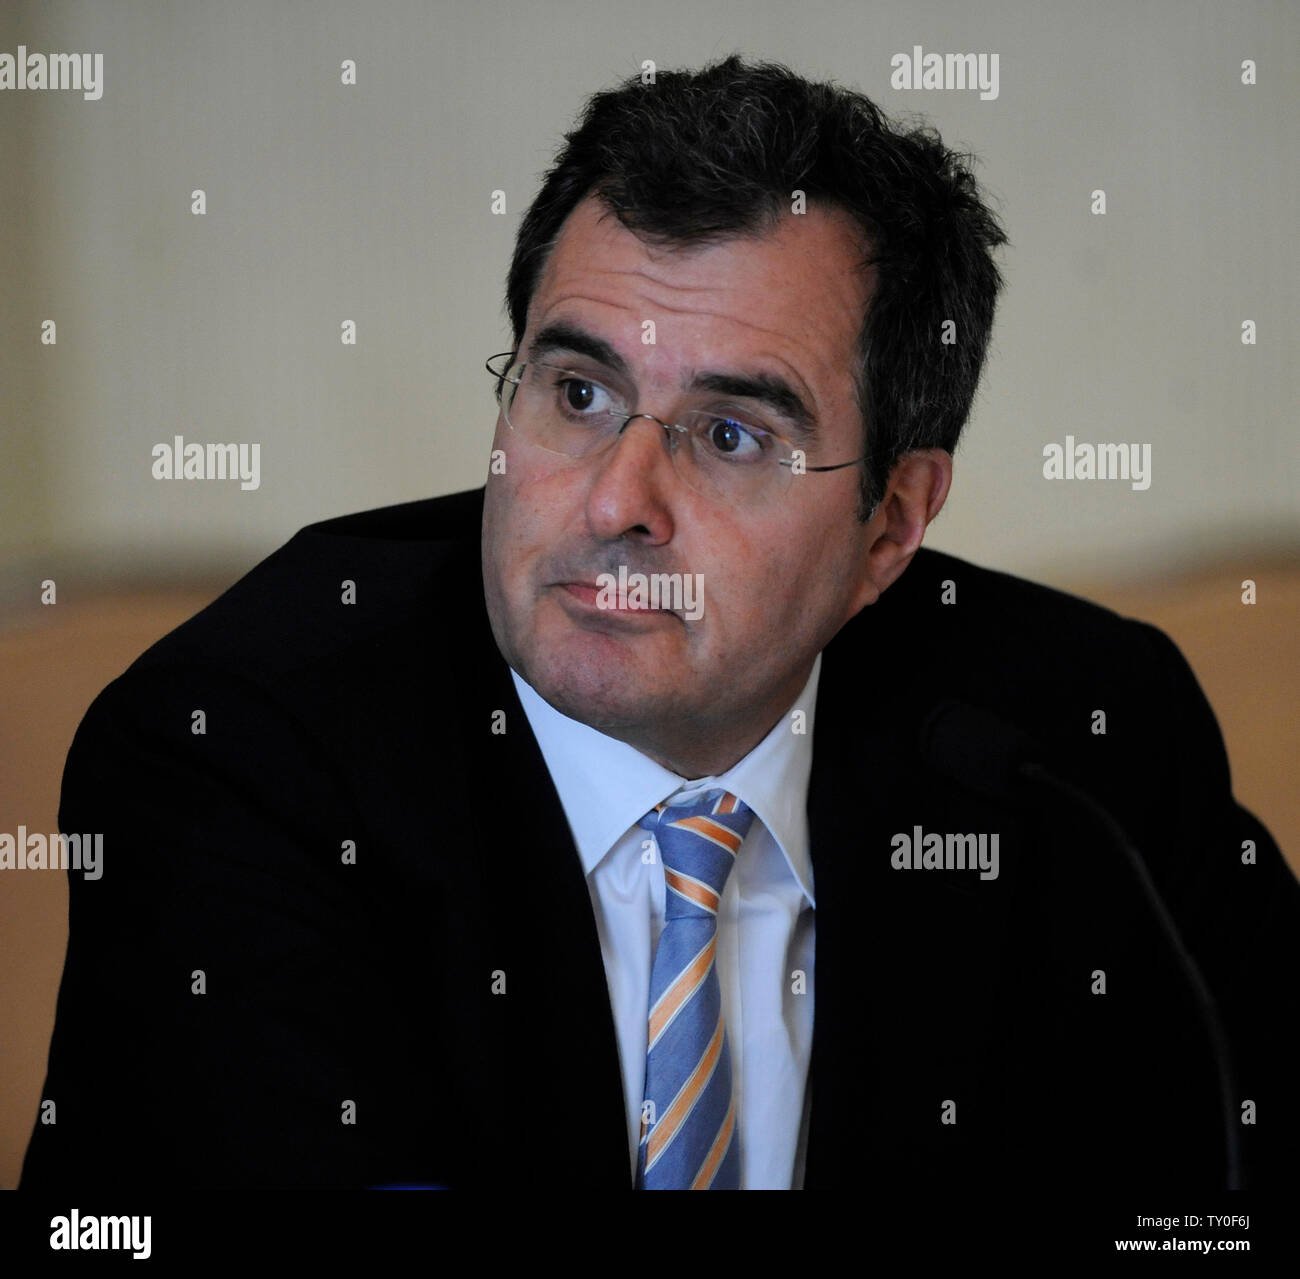 Peter Chernin, president and COO of News Corporation participate in Eliminating Malaria: A Workshop at the 2008 Milken Institute Global Conference in Beverly Hills, California on April 29, 2008. (UPI Photo/Jim Ruymen) Stock Photo